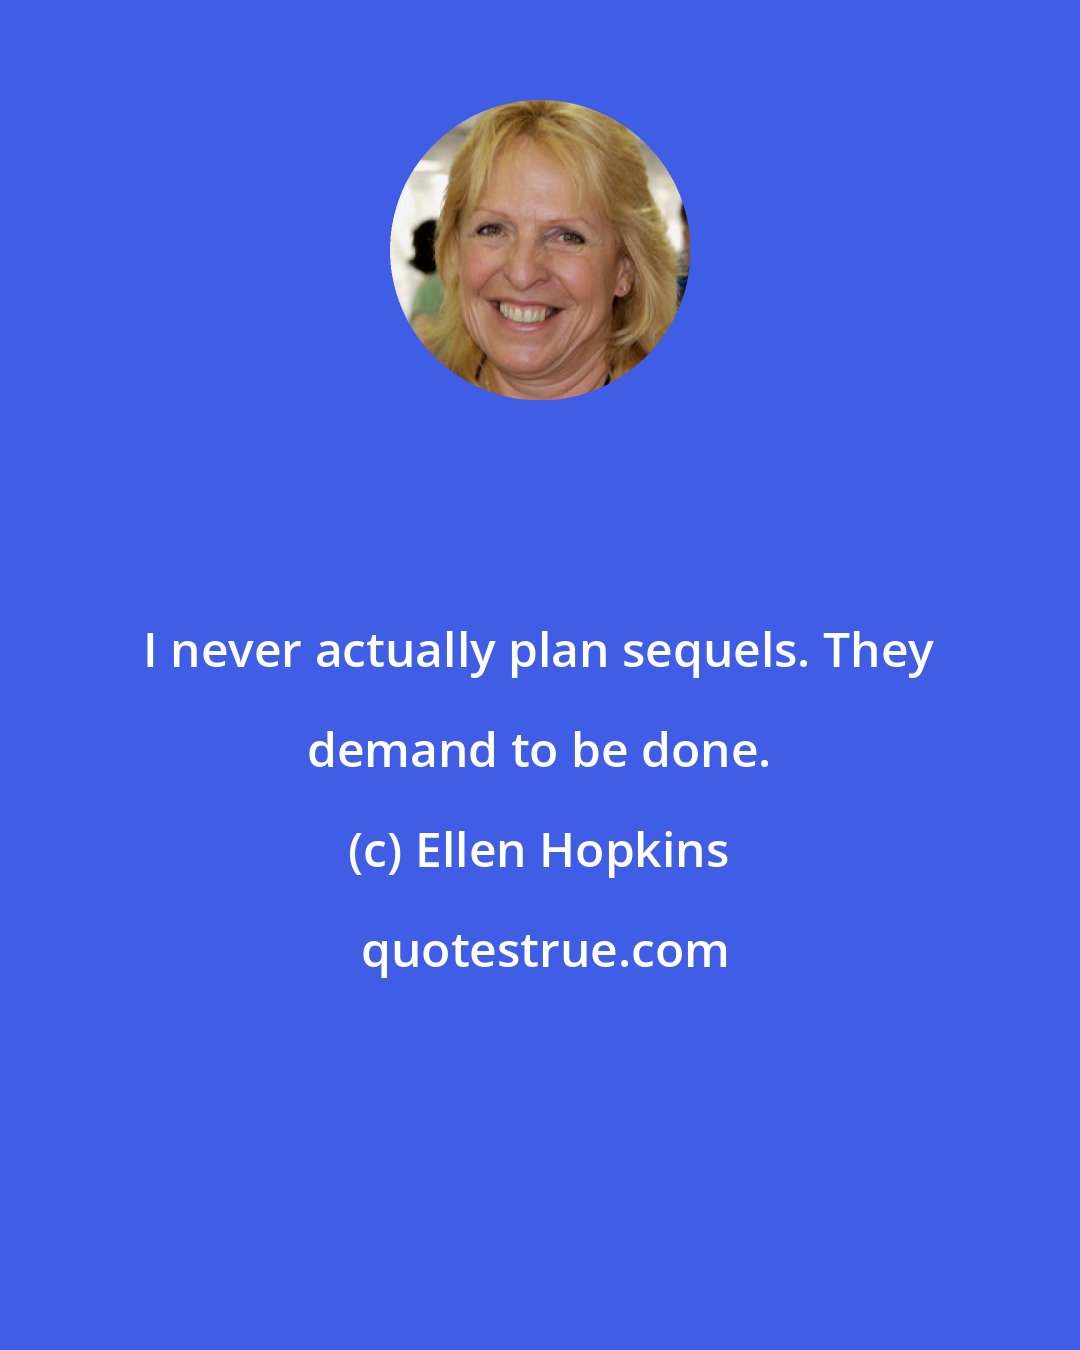 Ellen Hopkins: I never actually plan sequels. They demand to be done.